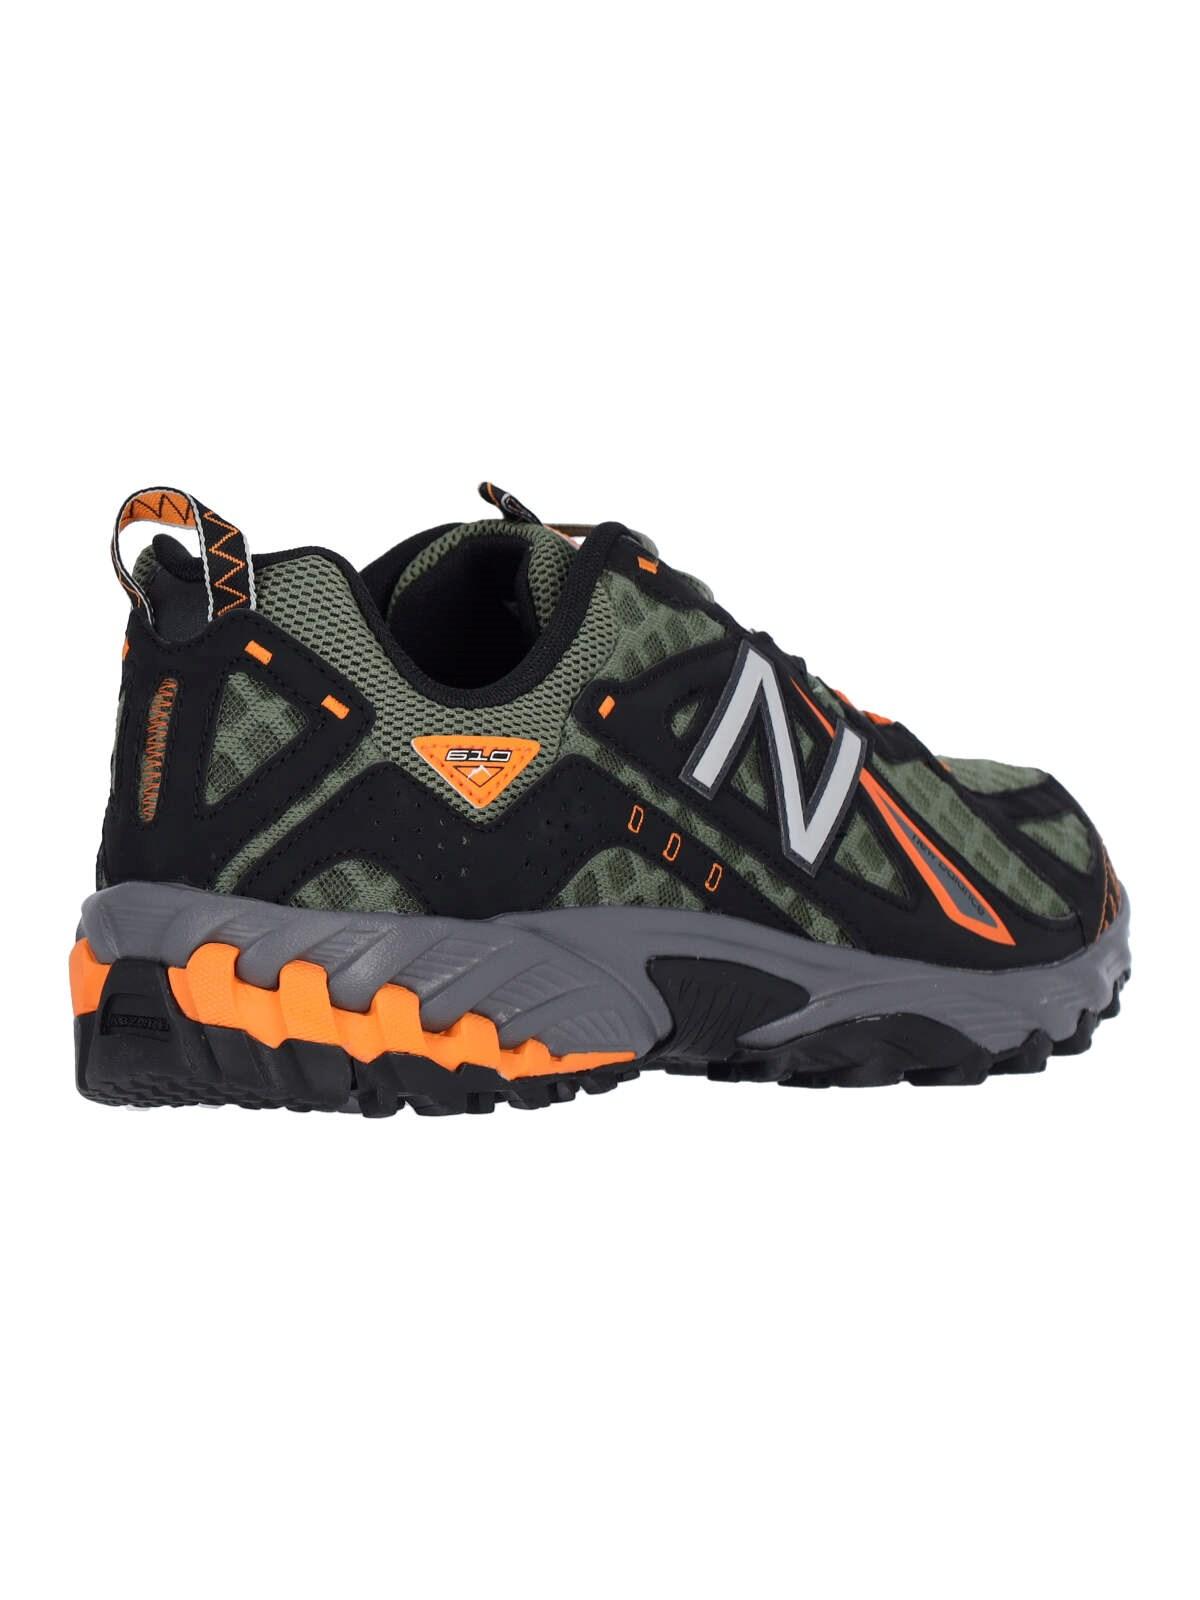 Shop New Balance 610v1 Sneakers